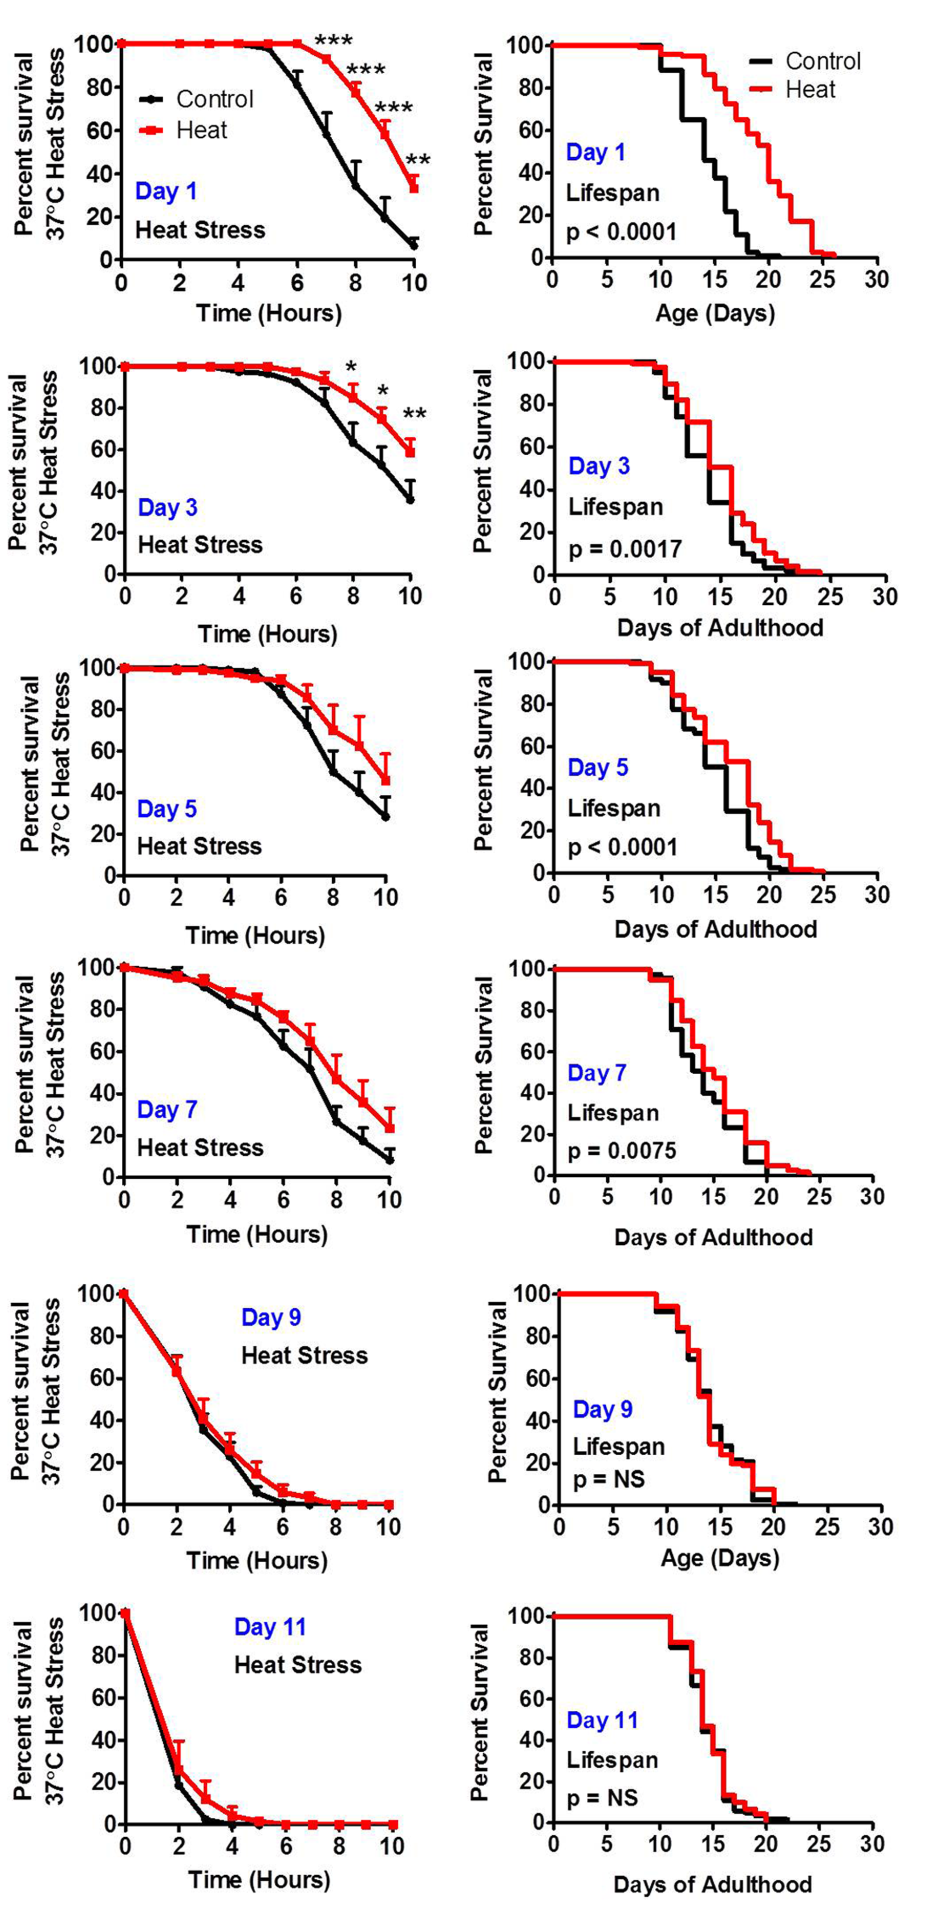 The ability to respond to stress decreases with age